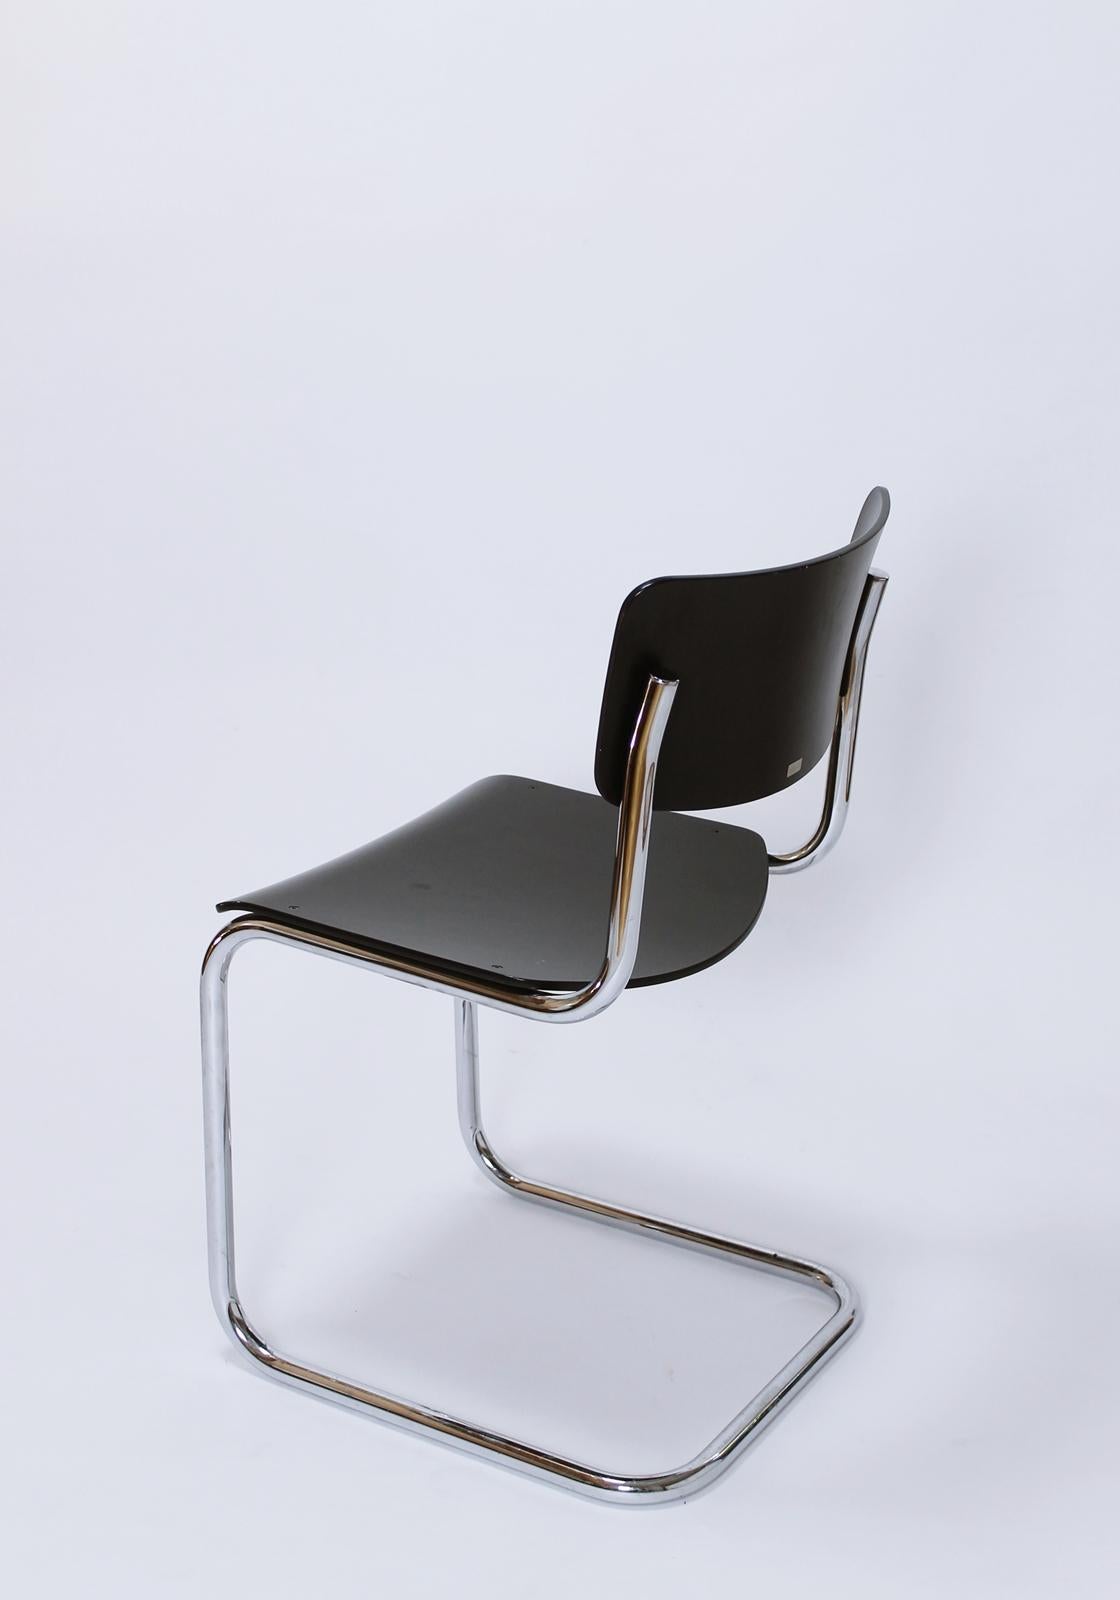 20th Century Bauhaus Classic S43 Cantilevered Chair by Mart Stam for Thonet, Germany For Sale